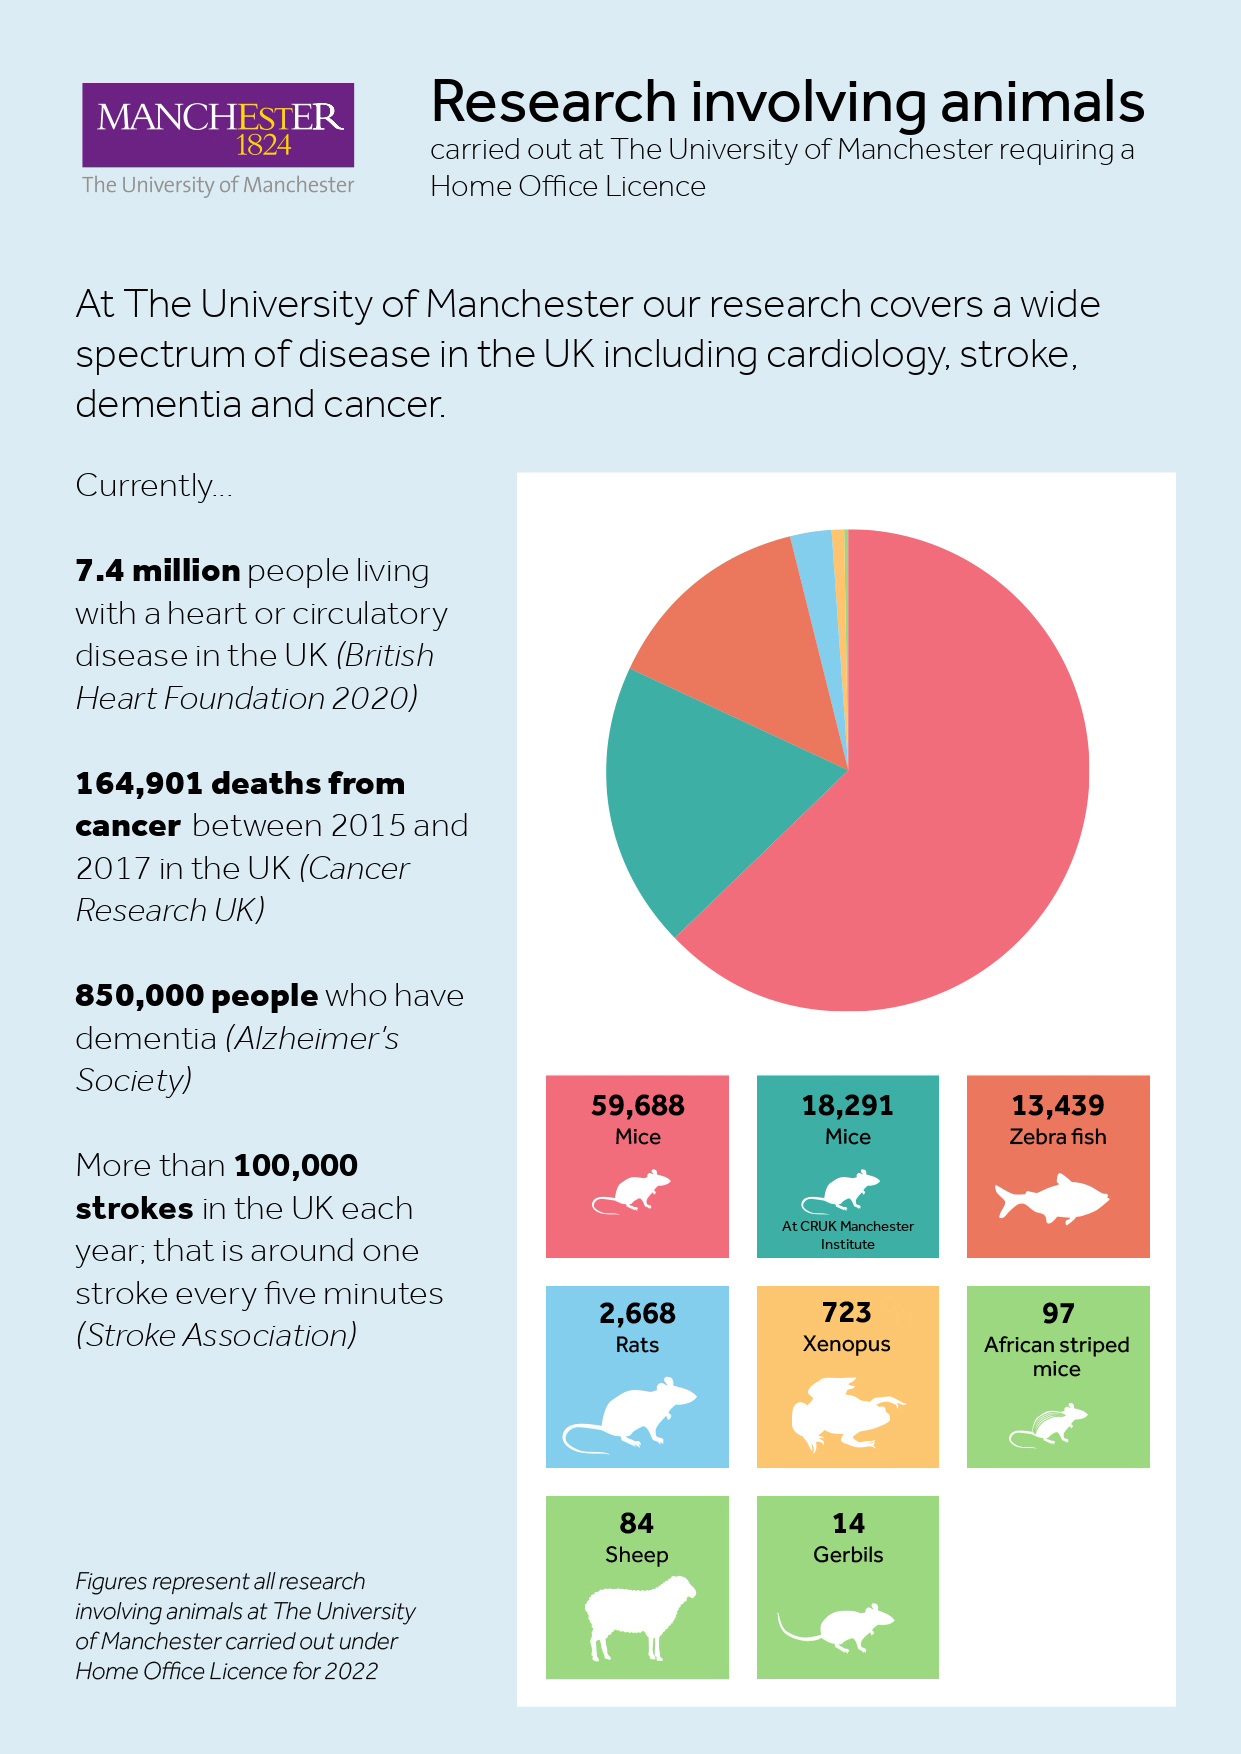 Our research involving animals | The University of Manchester